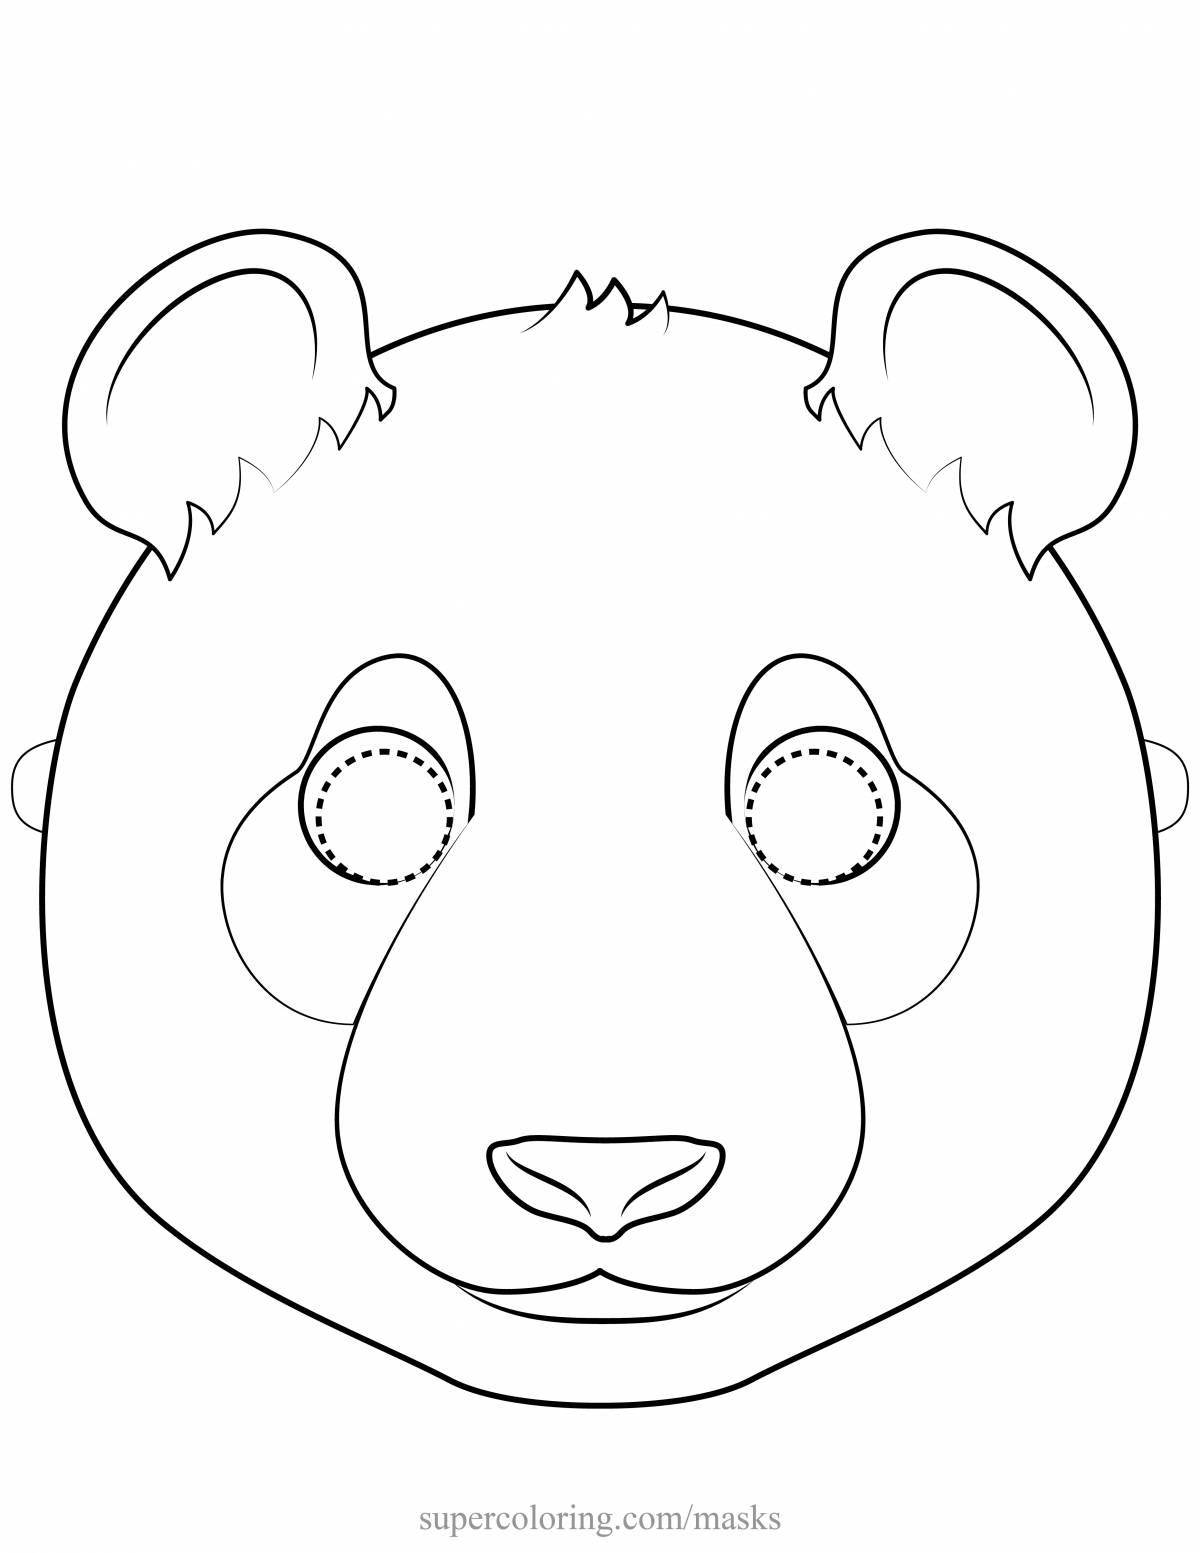 Cute bear head coloring page